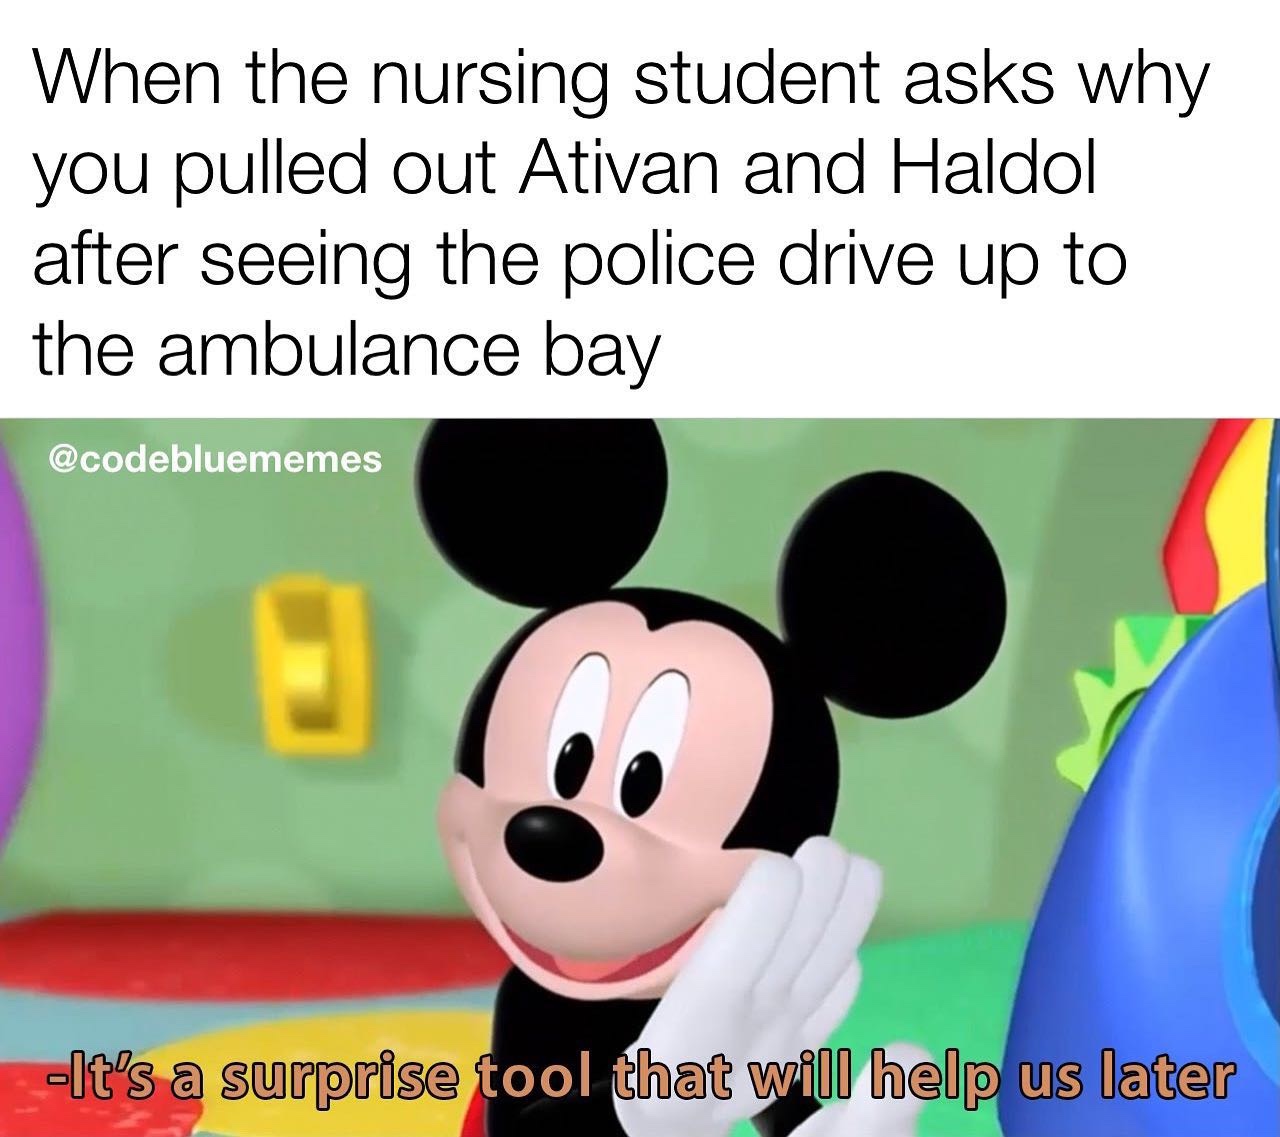 history memes - When the nursing student asks why you pulled out Ativan and Haldol after seeing the police drive up to the ambulance bay It's a surprise tool that will help us later